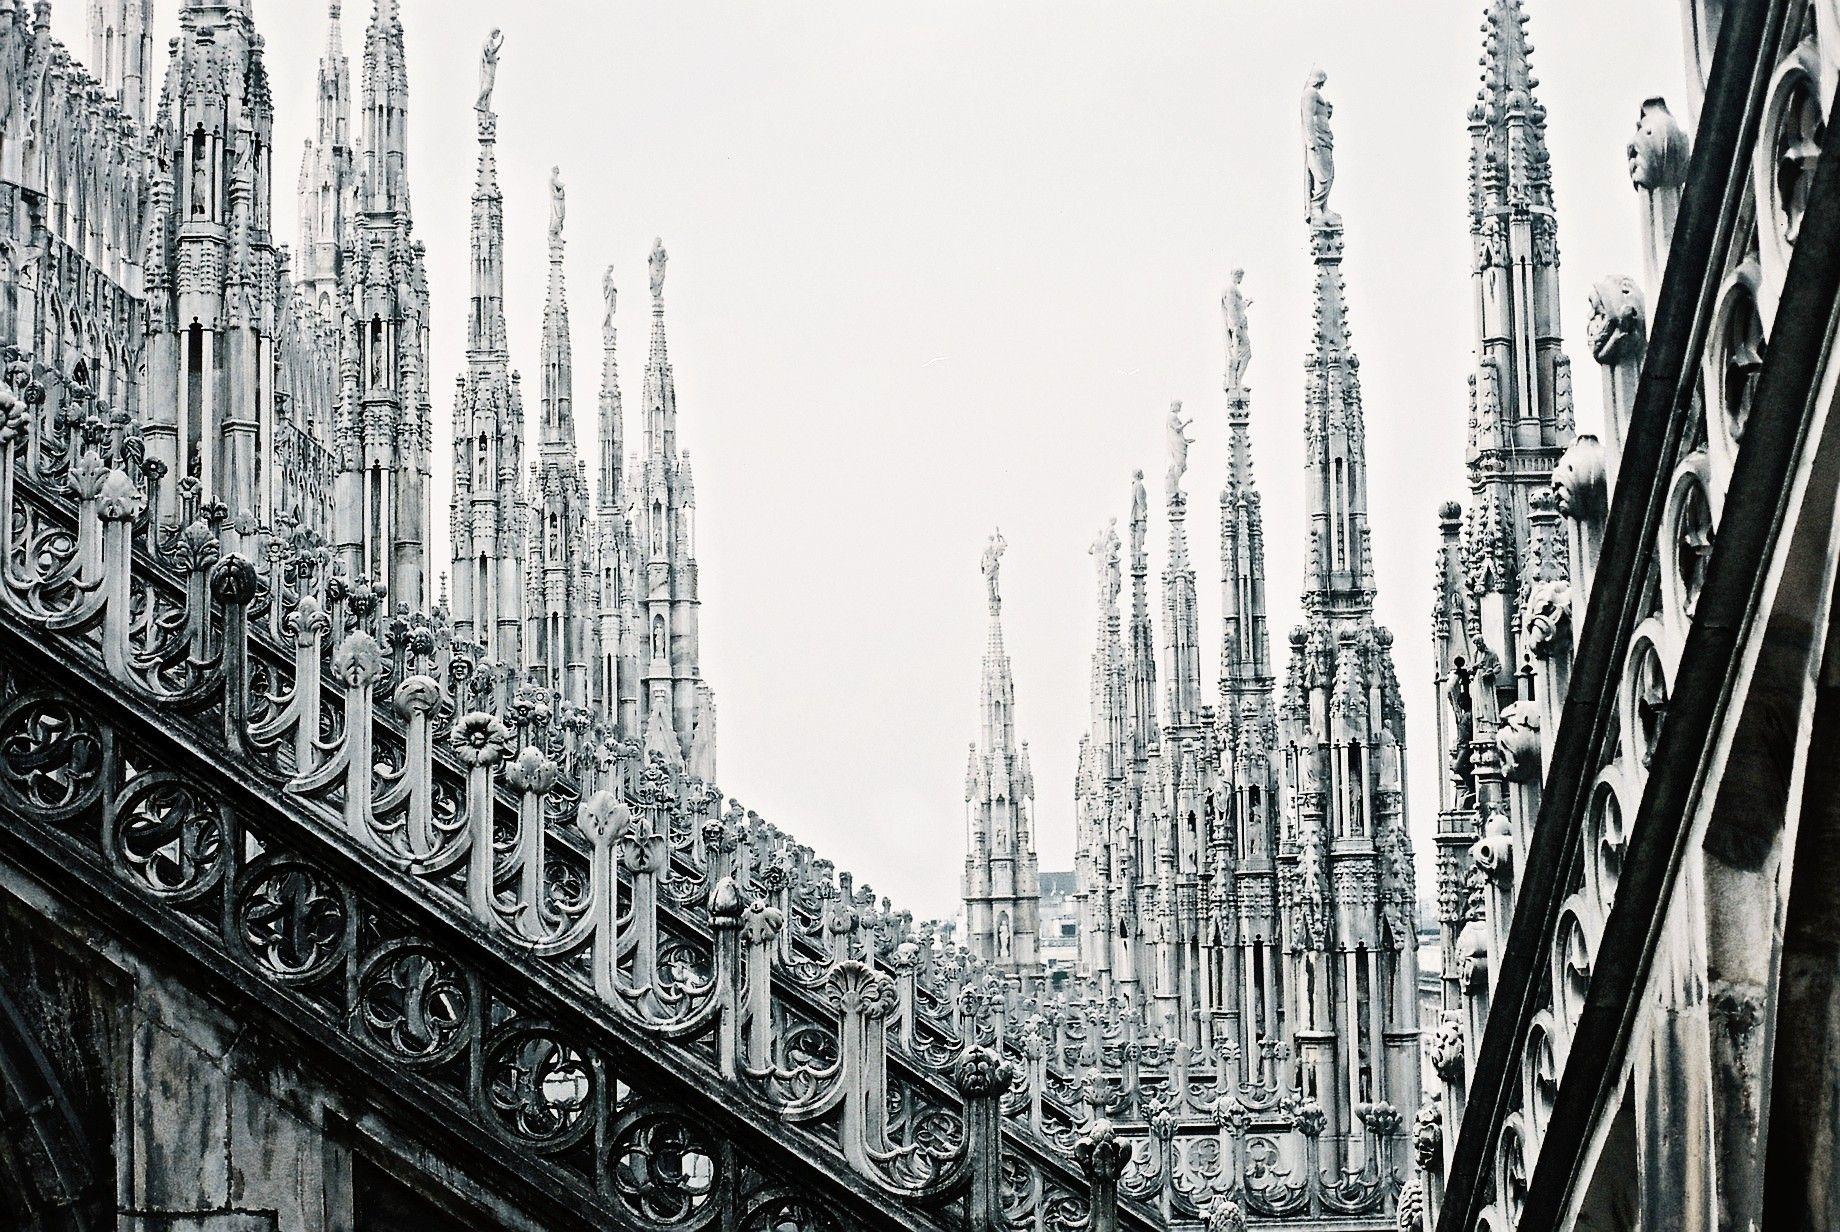 Stairways italy cathedral milan city stone buildings wallpaper